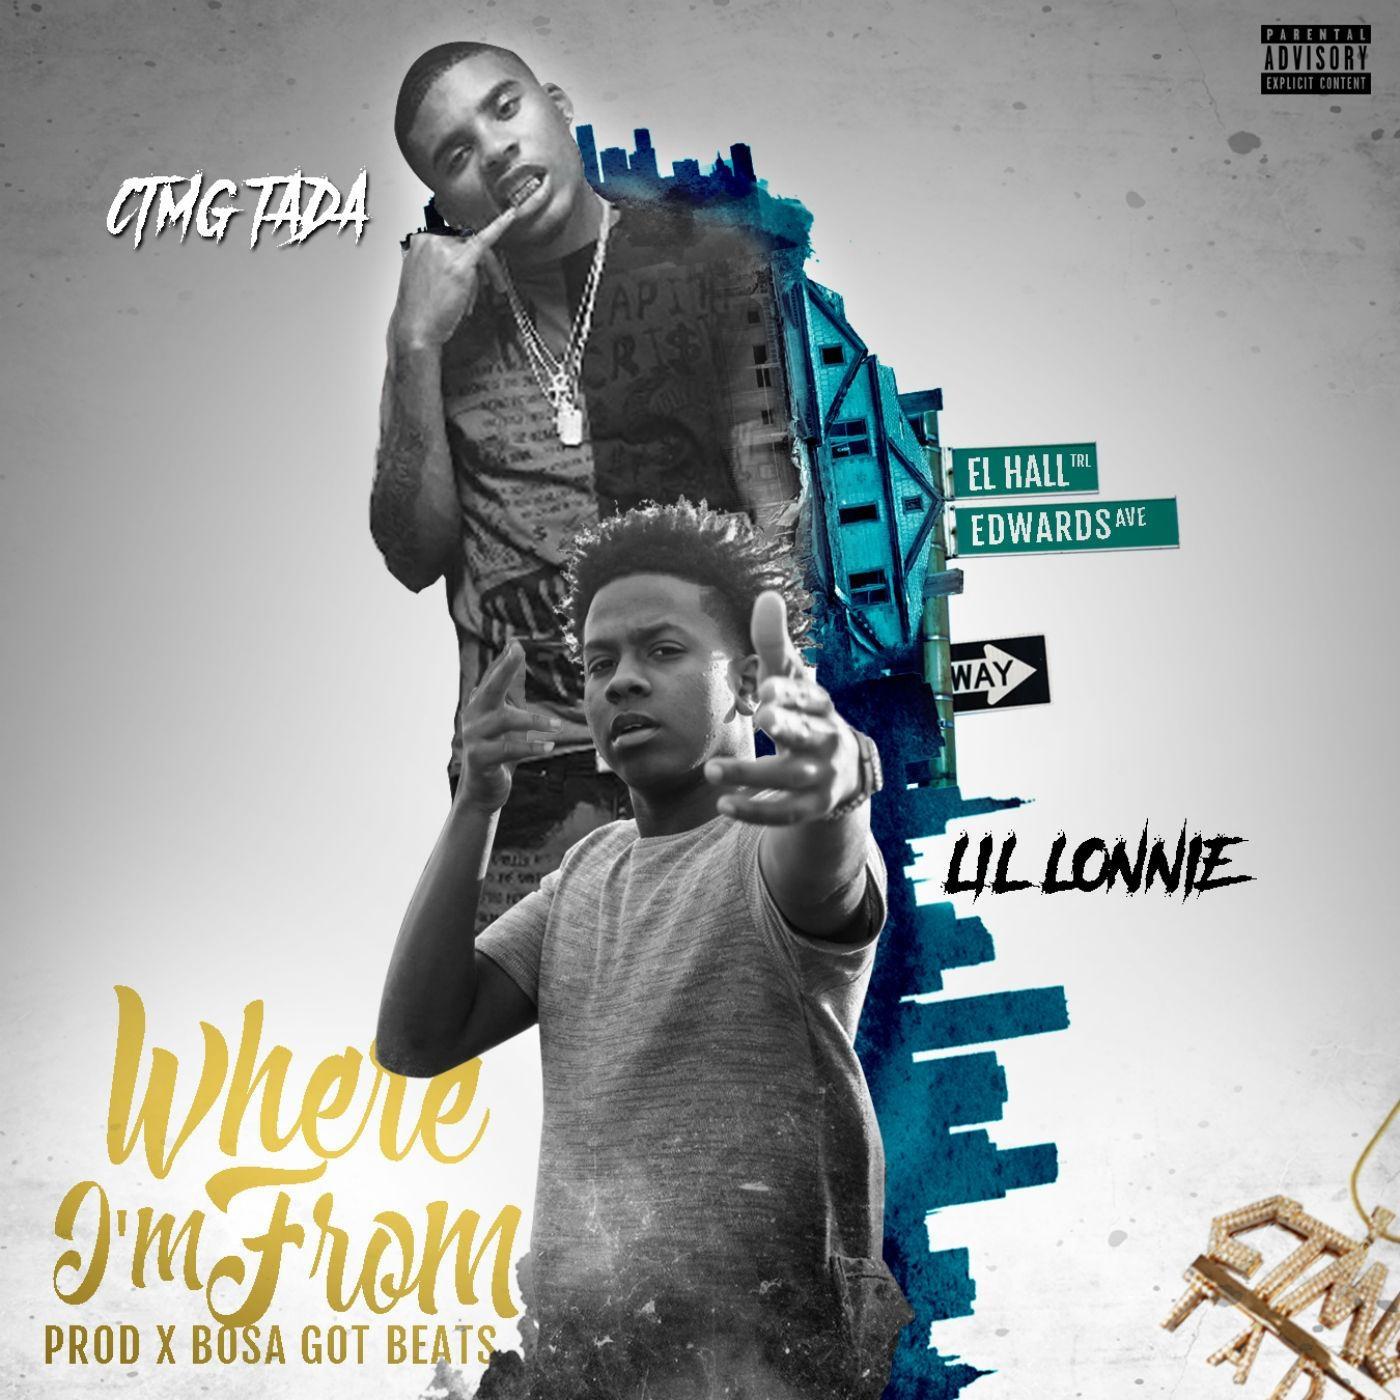 CTMG Tada - Where I'm From (feat. Lil Lonnie)